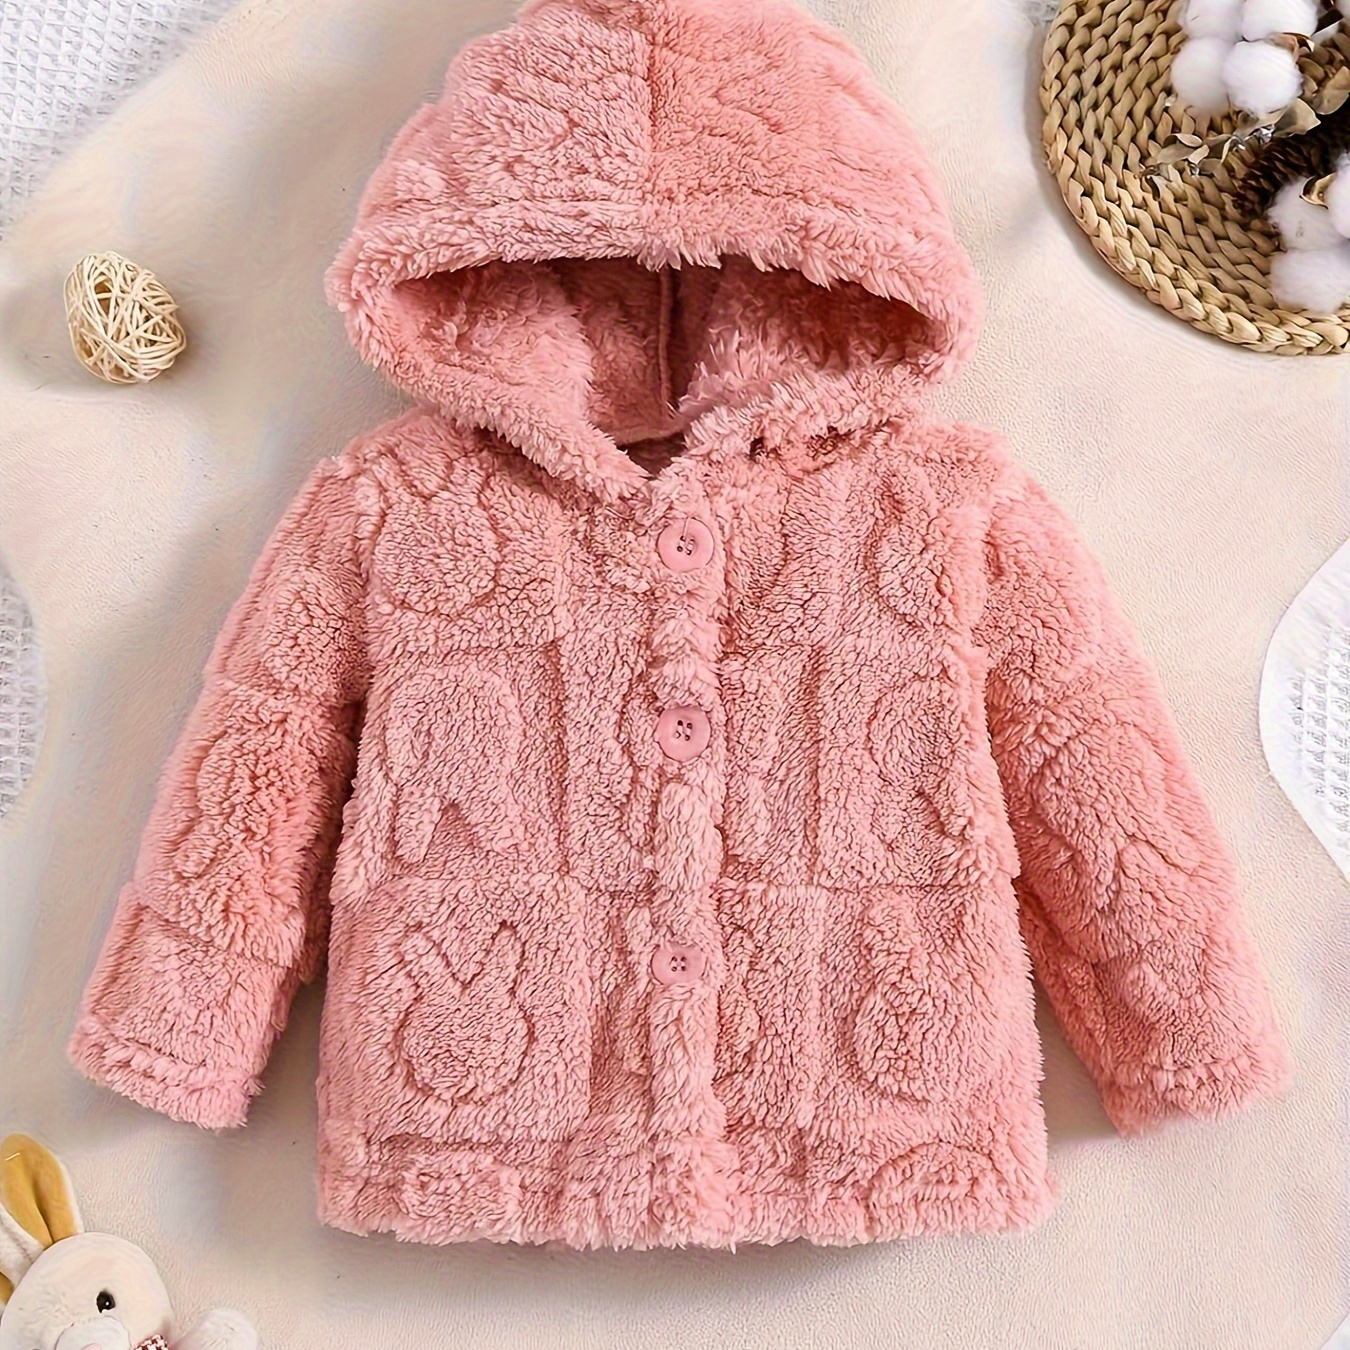 

Baby Girls Fashion Autumn Winter Thick Flannel Set Kids Warm New Casual & Comfy Hooded Jacket